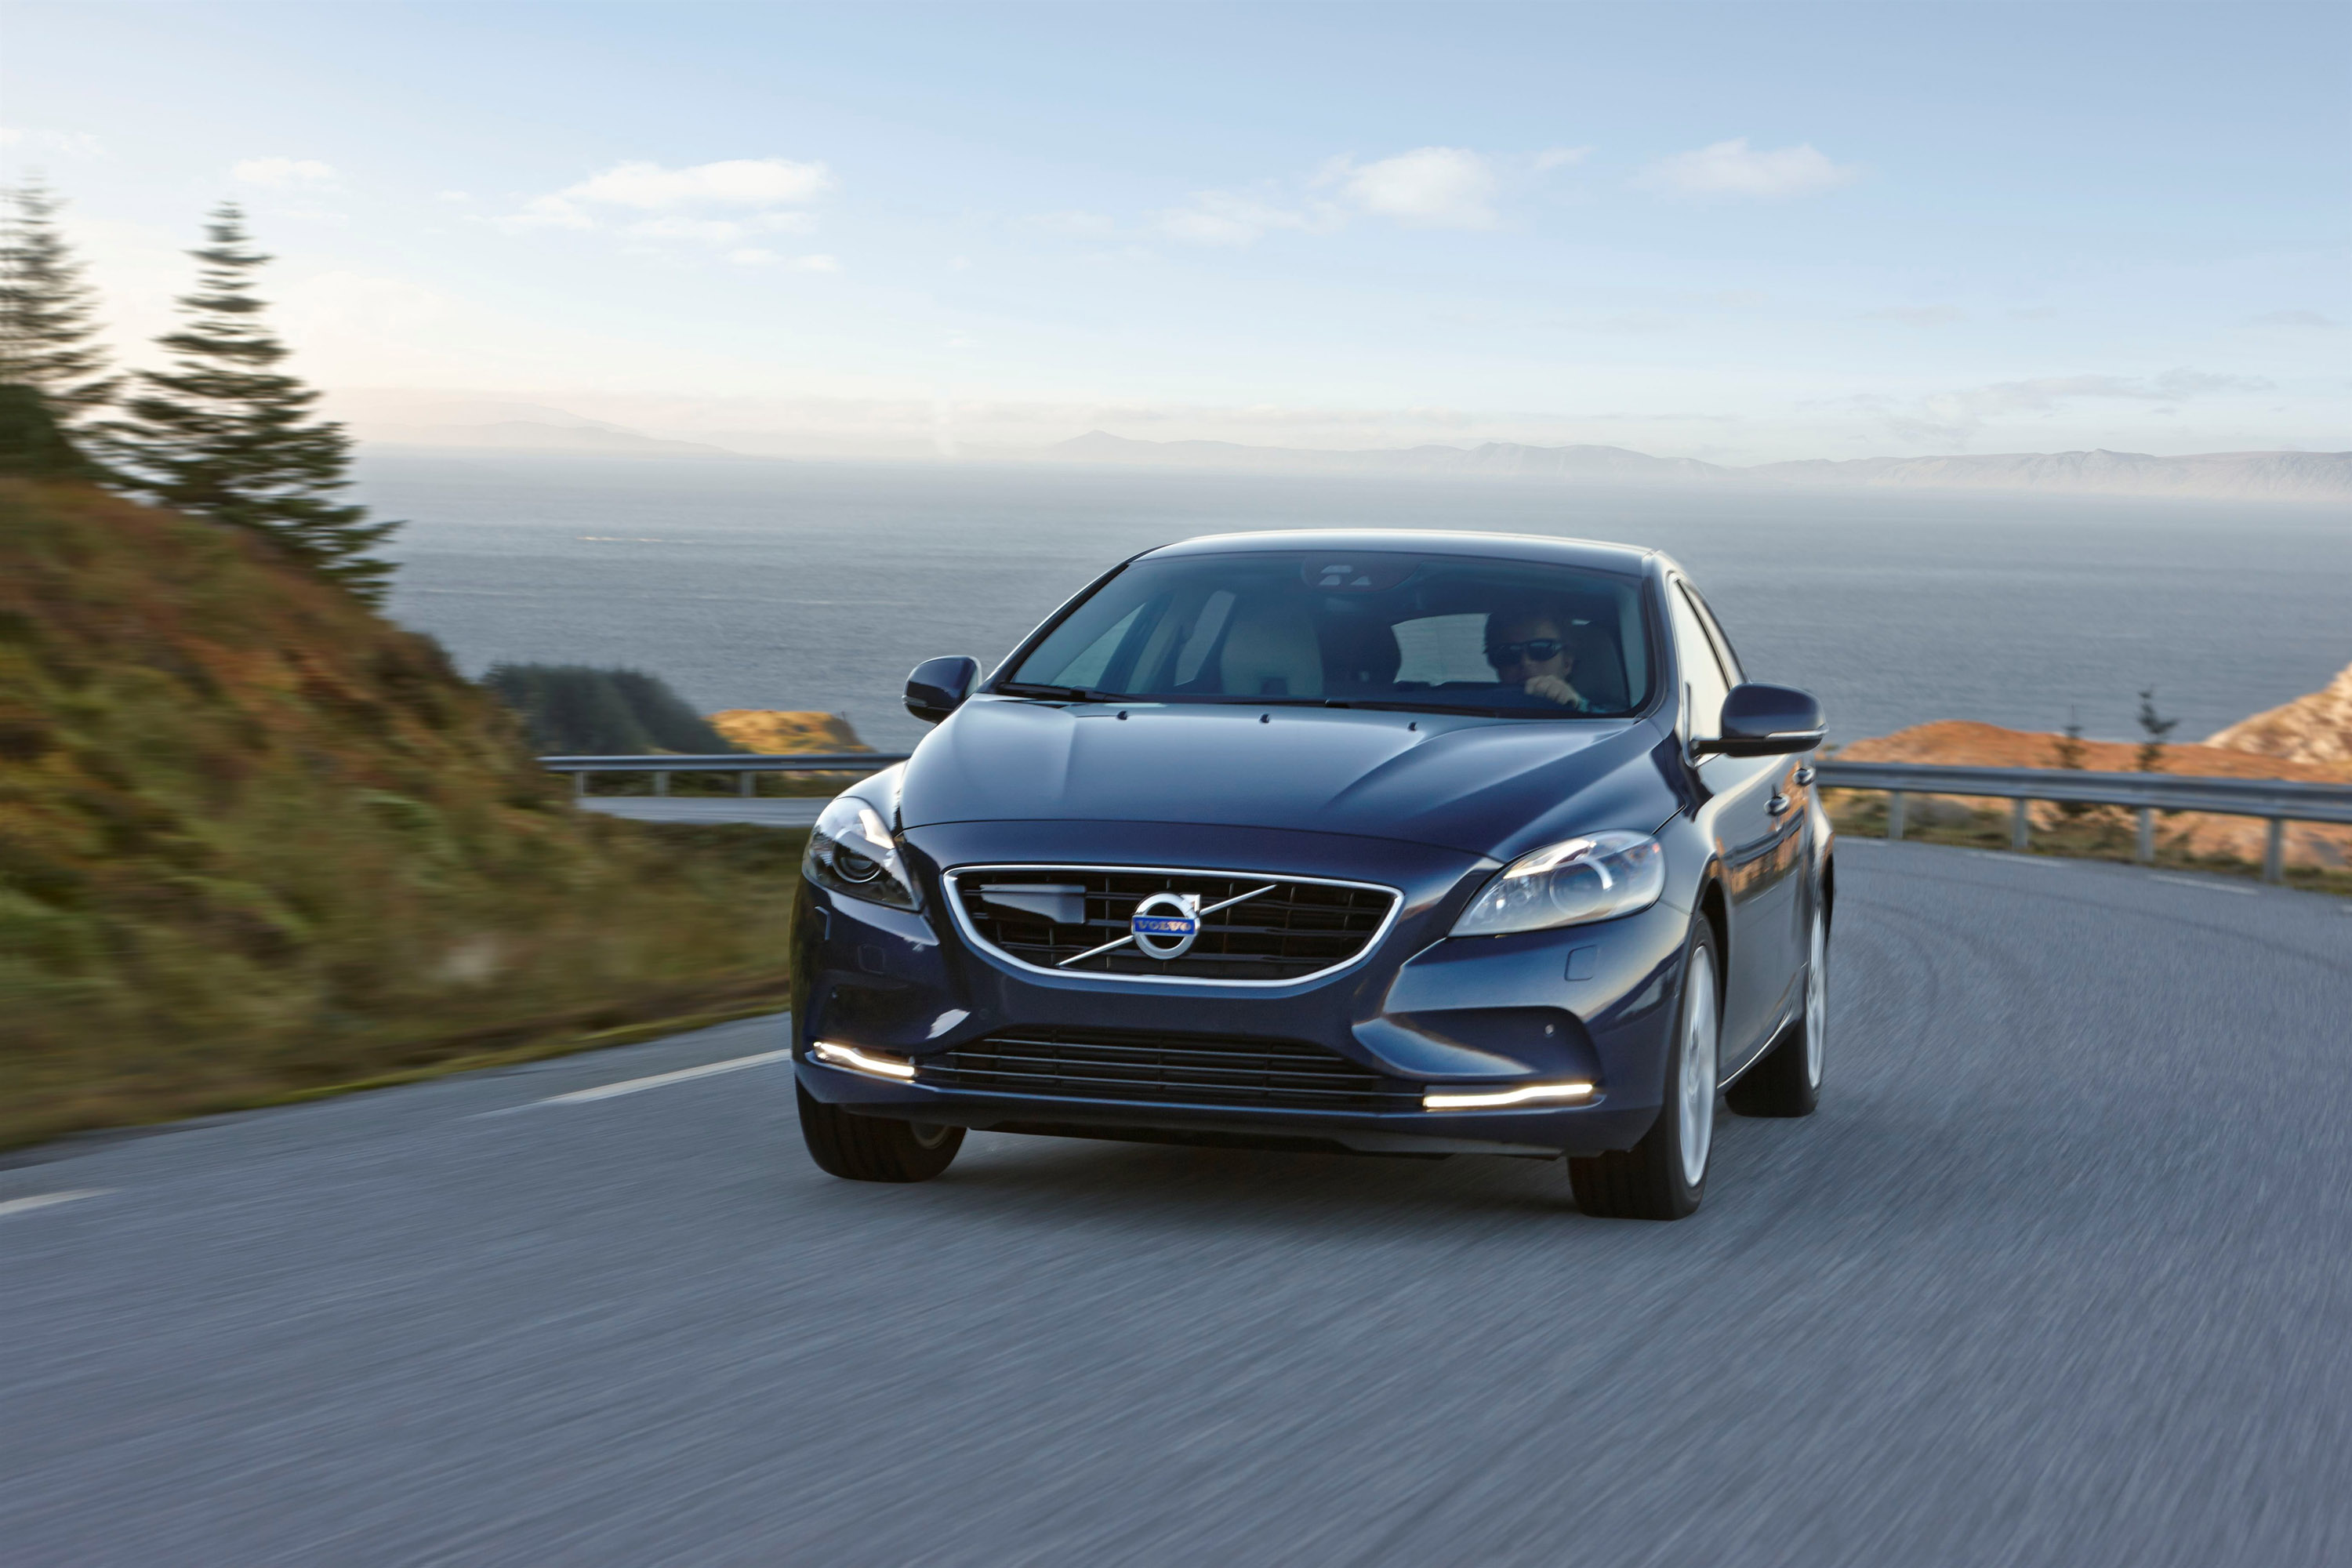 2014 Volvo V40 D4 HD Pictures